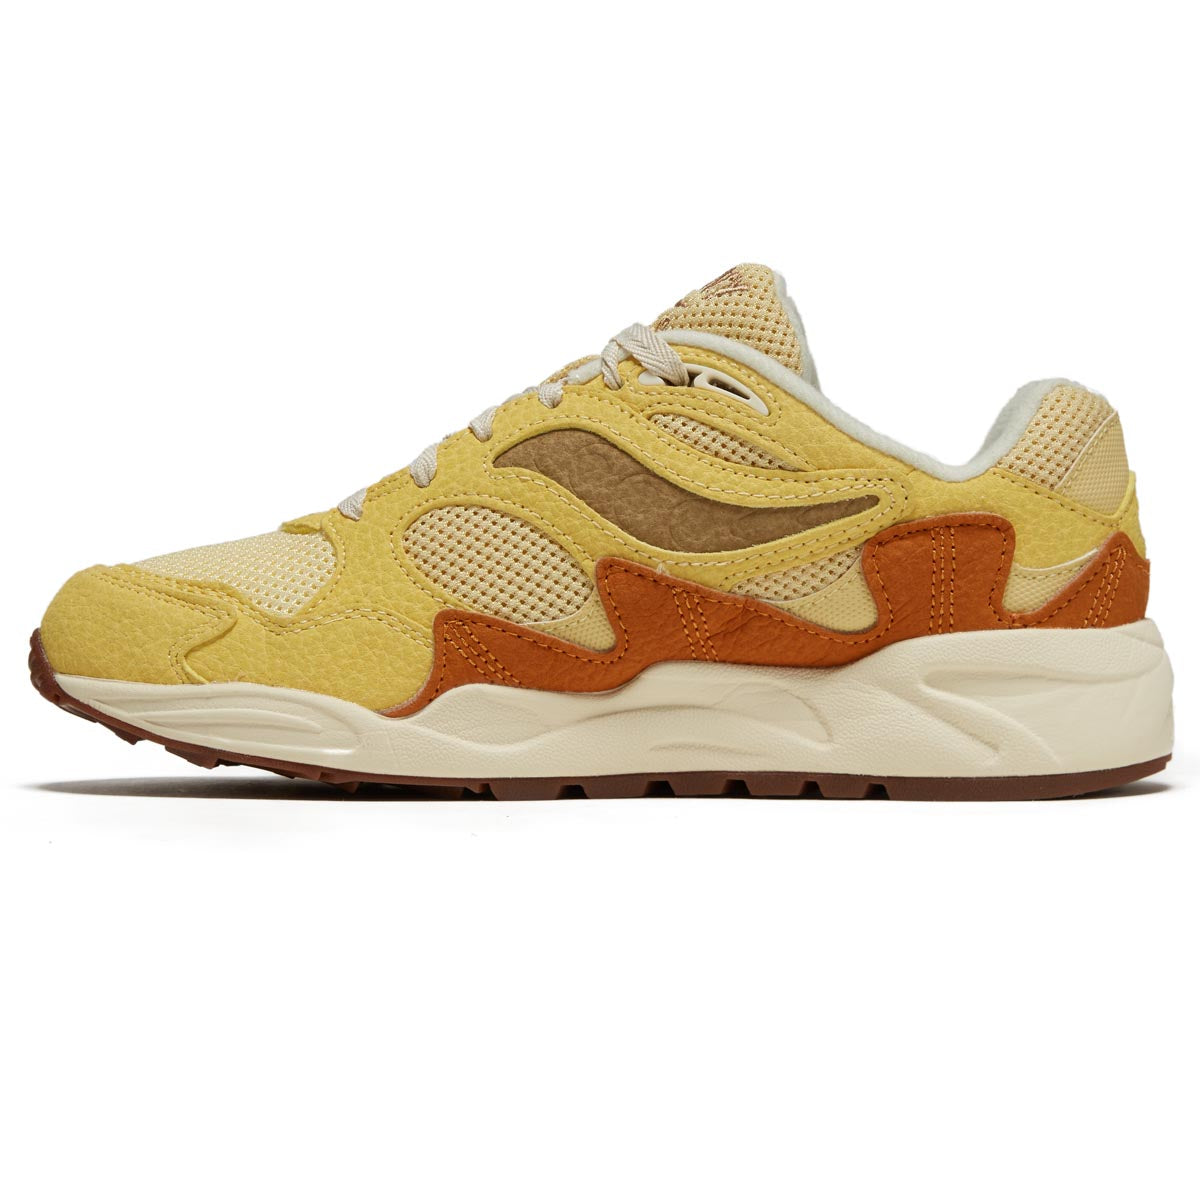 Saucony Grid Shadow 2 Shoes - Mustard/Tan image 2